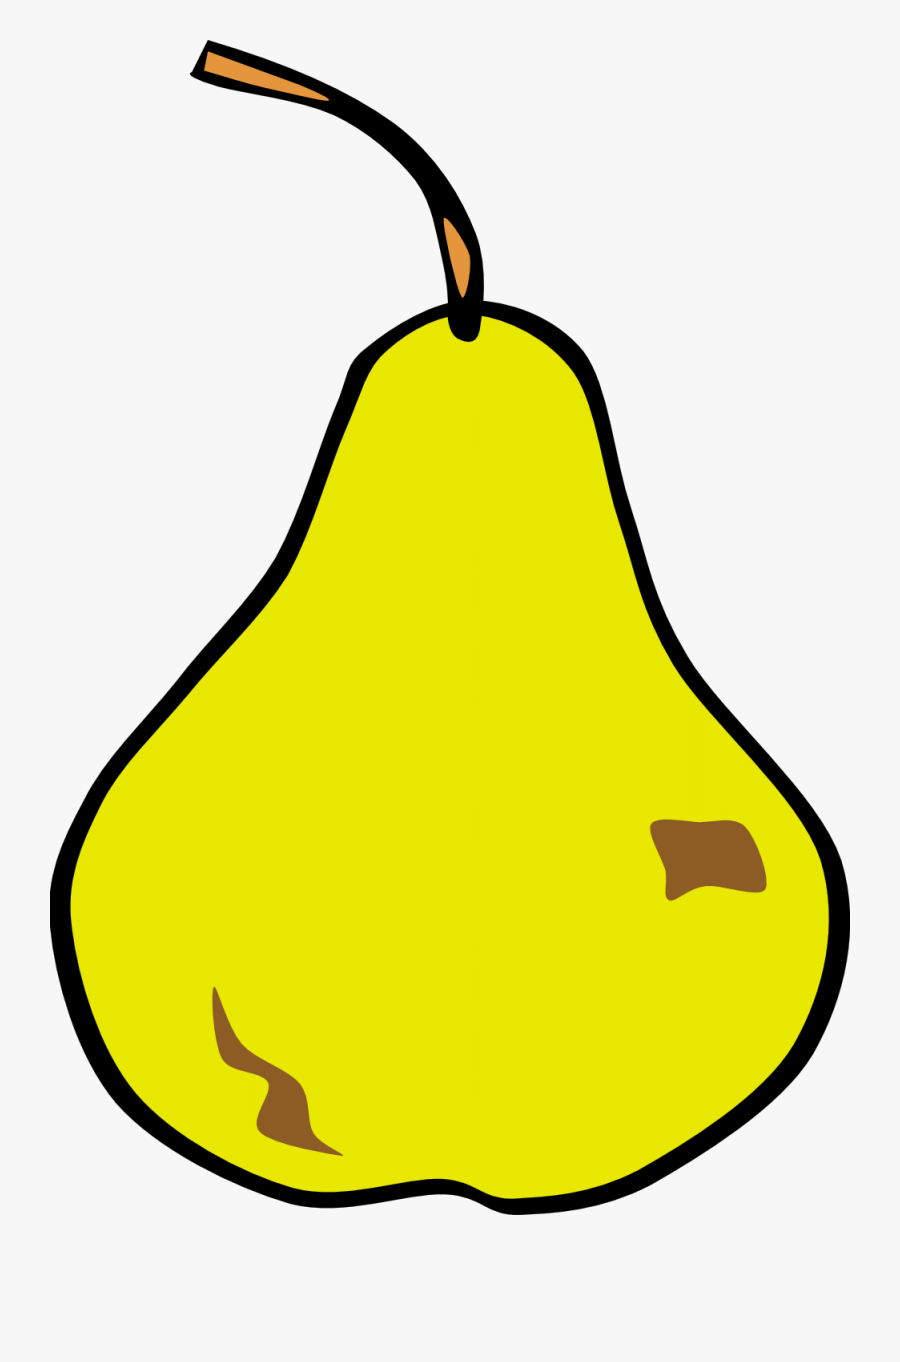 Simple Fruit Pear - Clipart Of Pear, Transparent Clipart